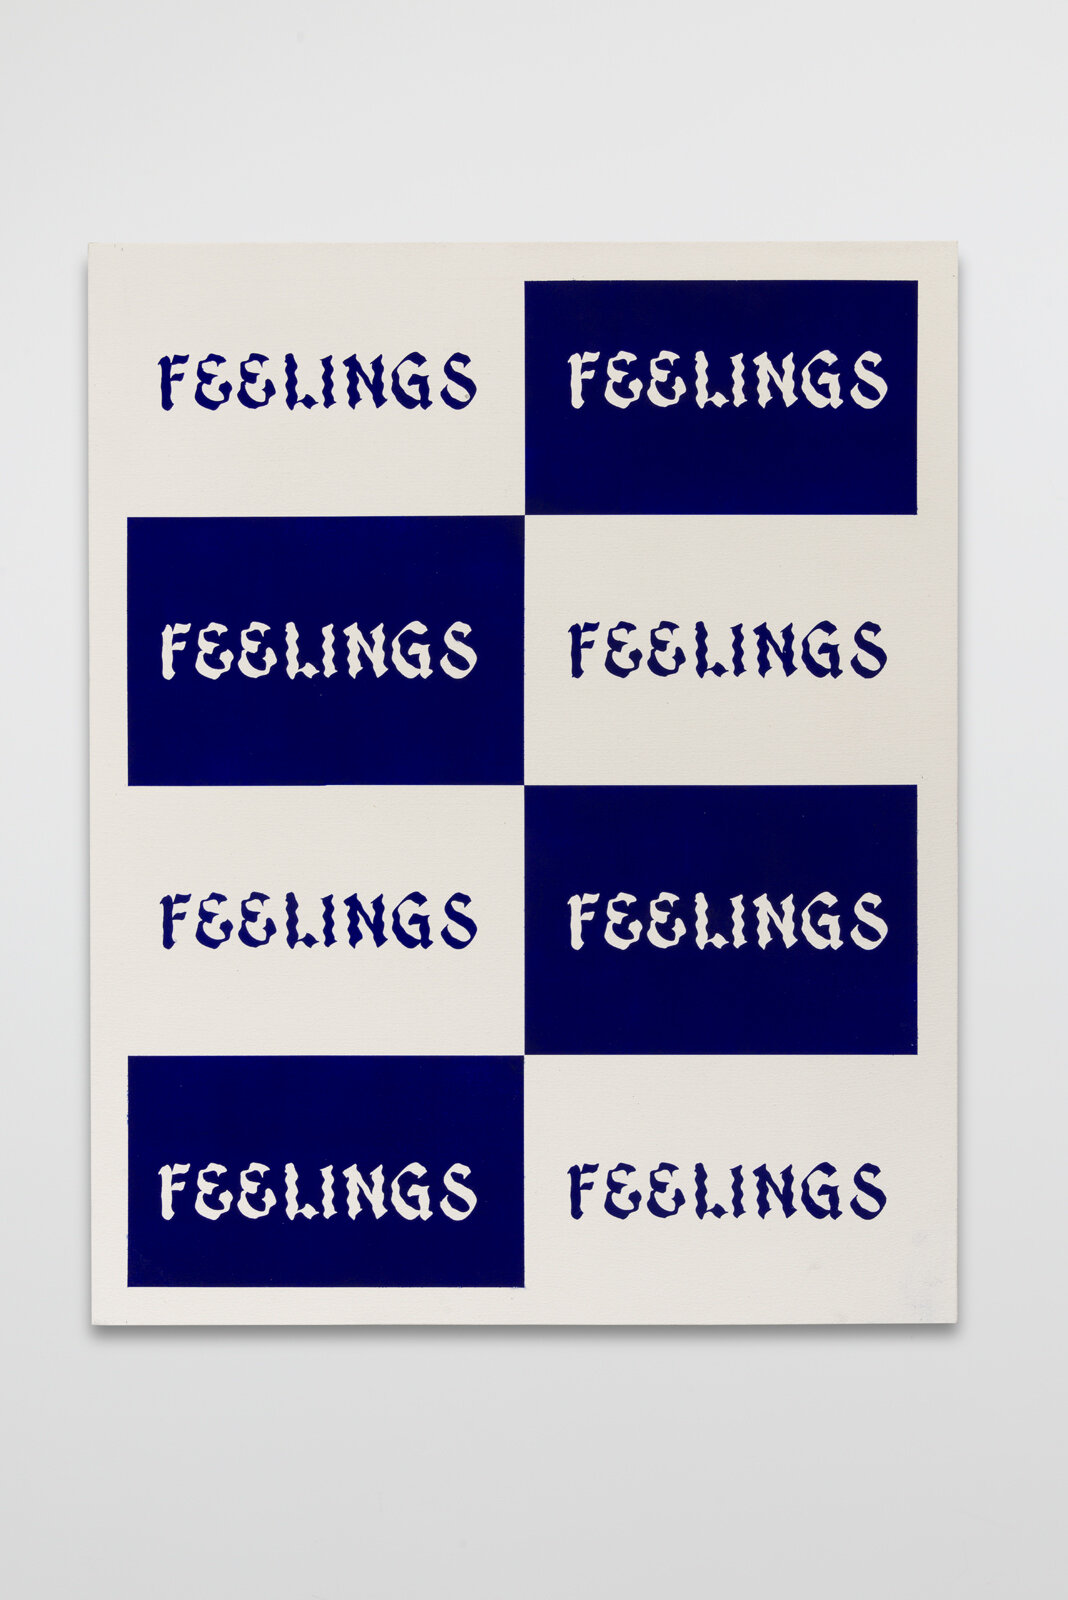   Feelings Painting 1,  2016. Acrylic on canvas. 30 x 24 inches 